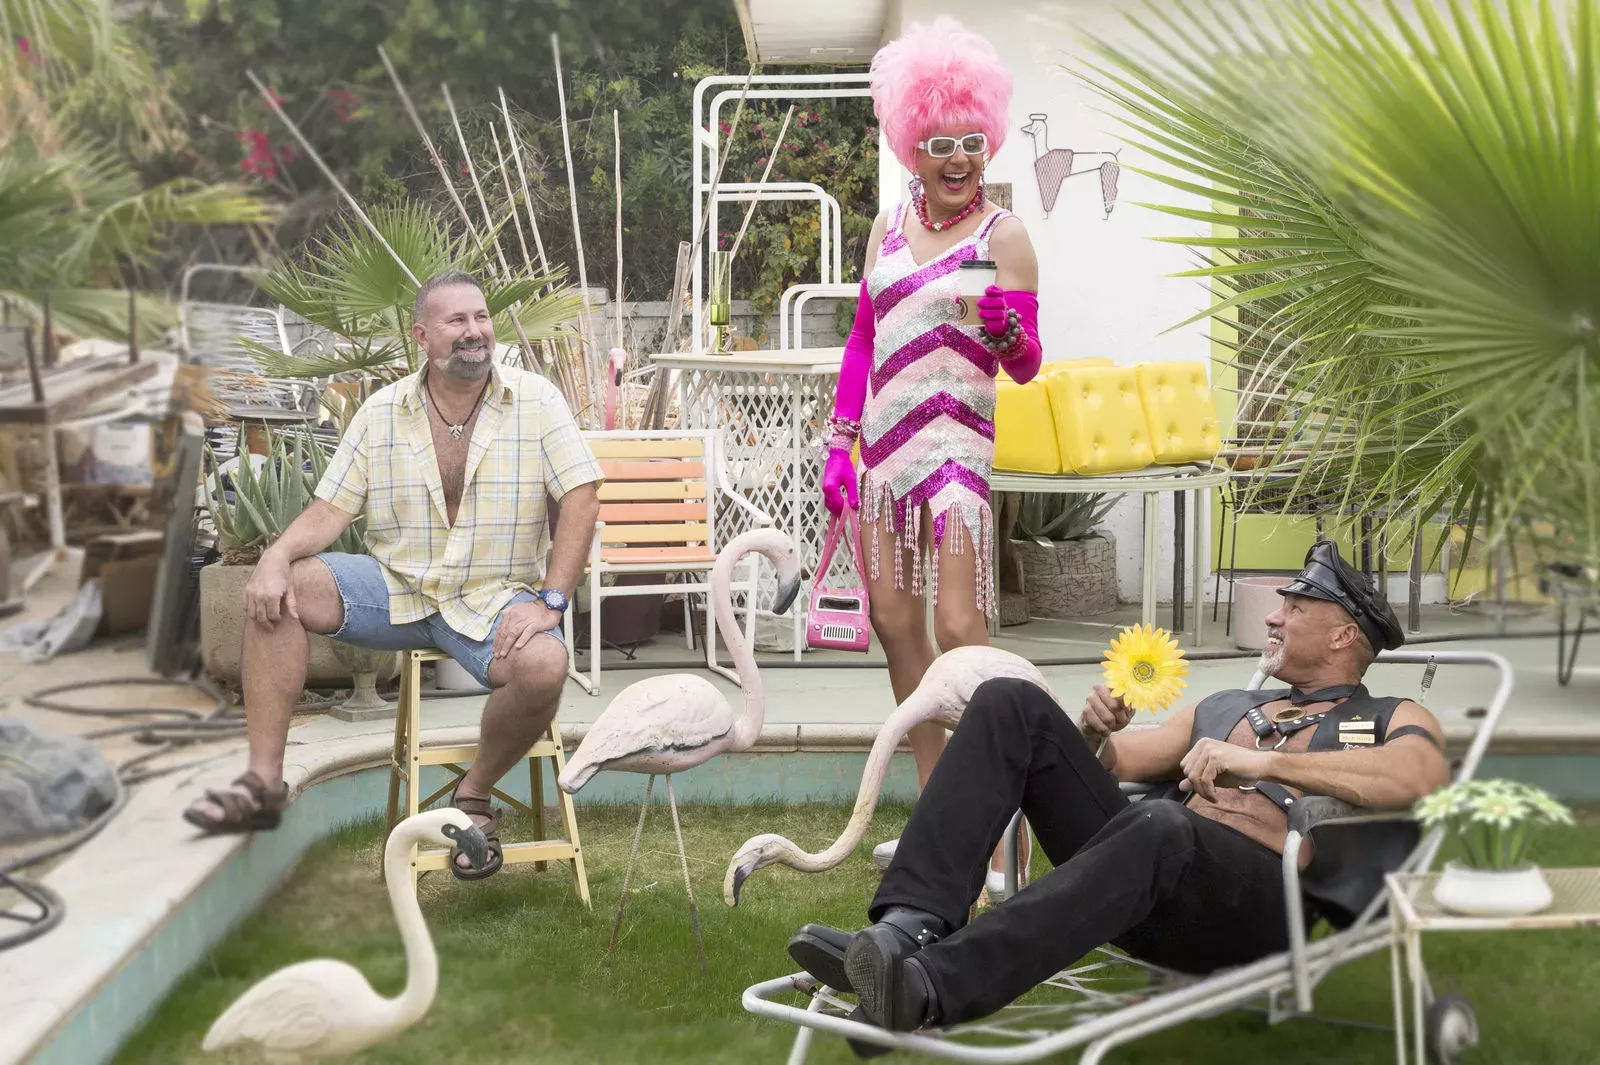 A man, a leather daddy, and a drag queen having fun outside. 